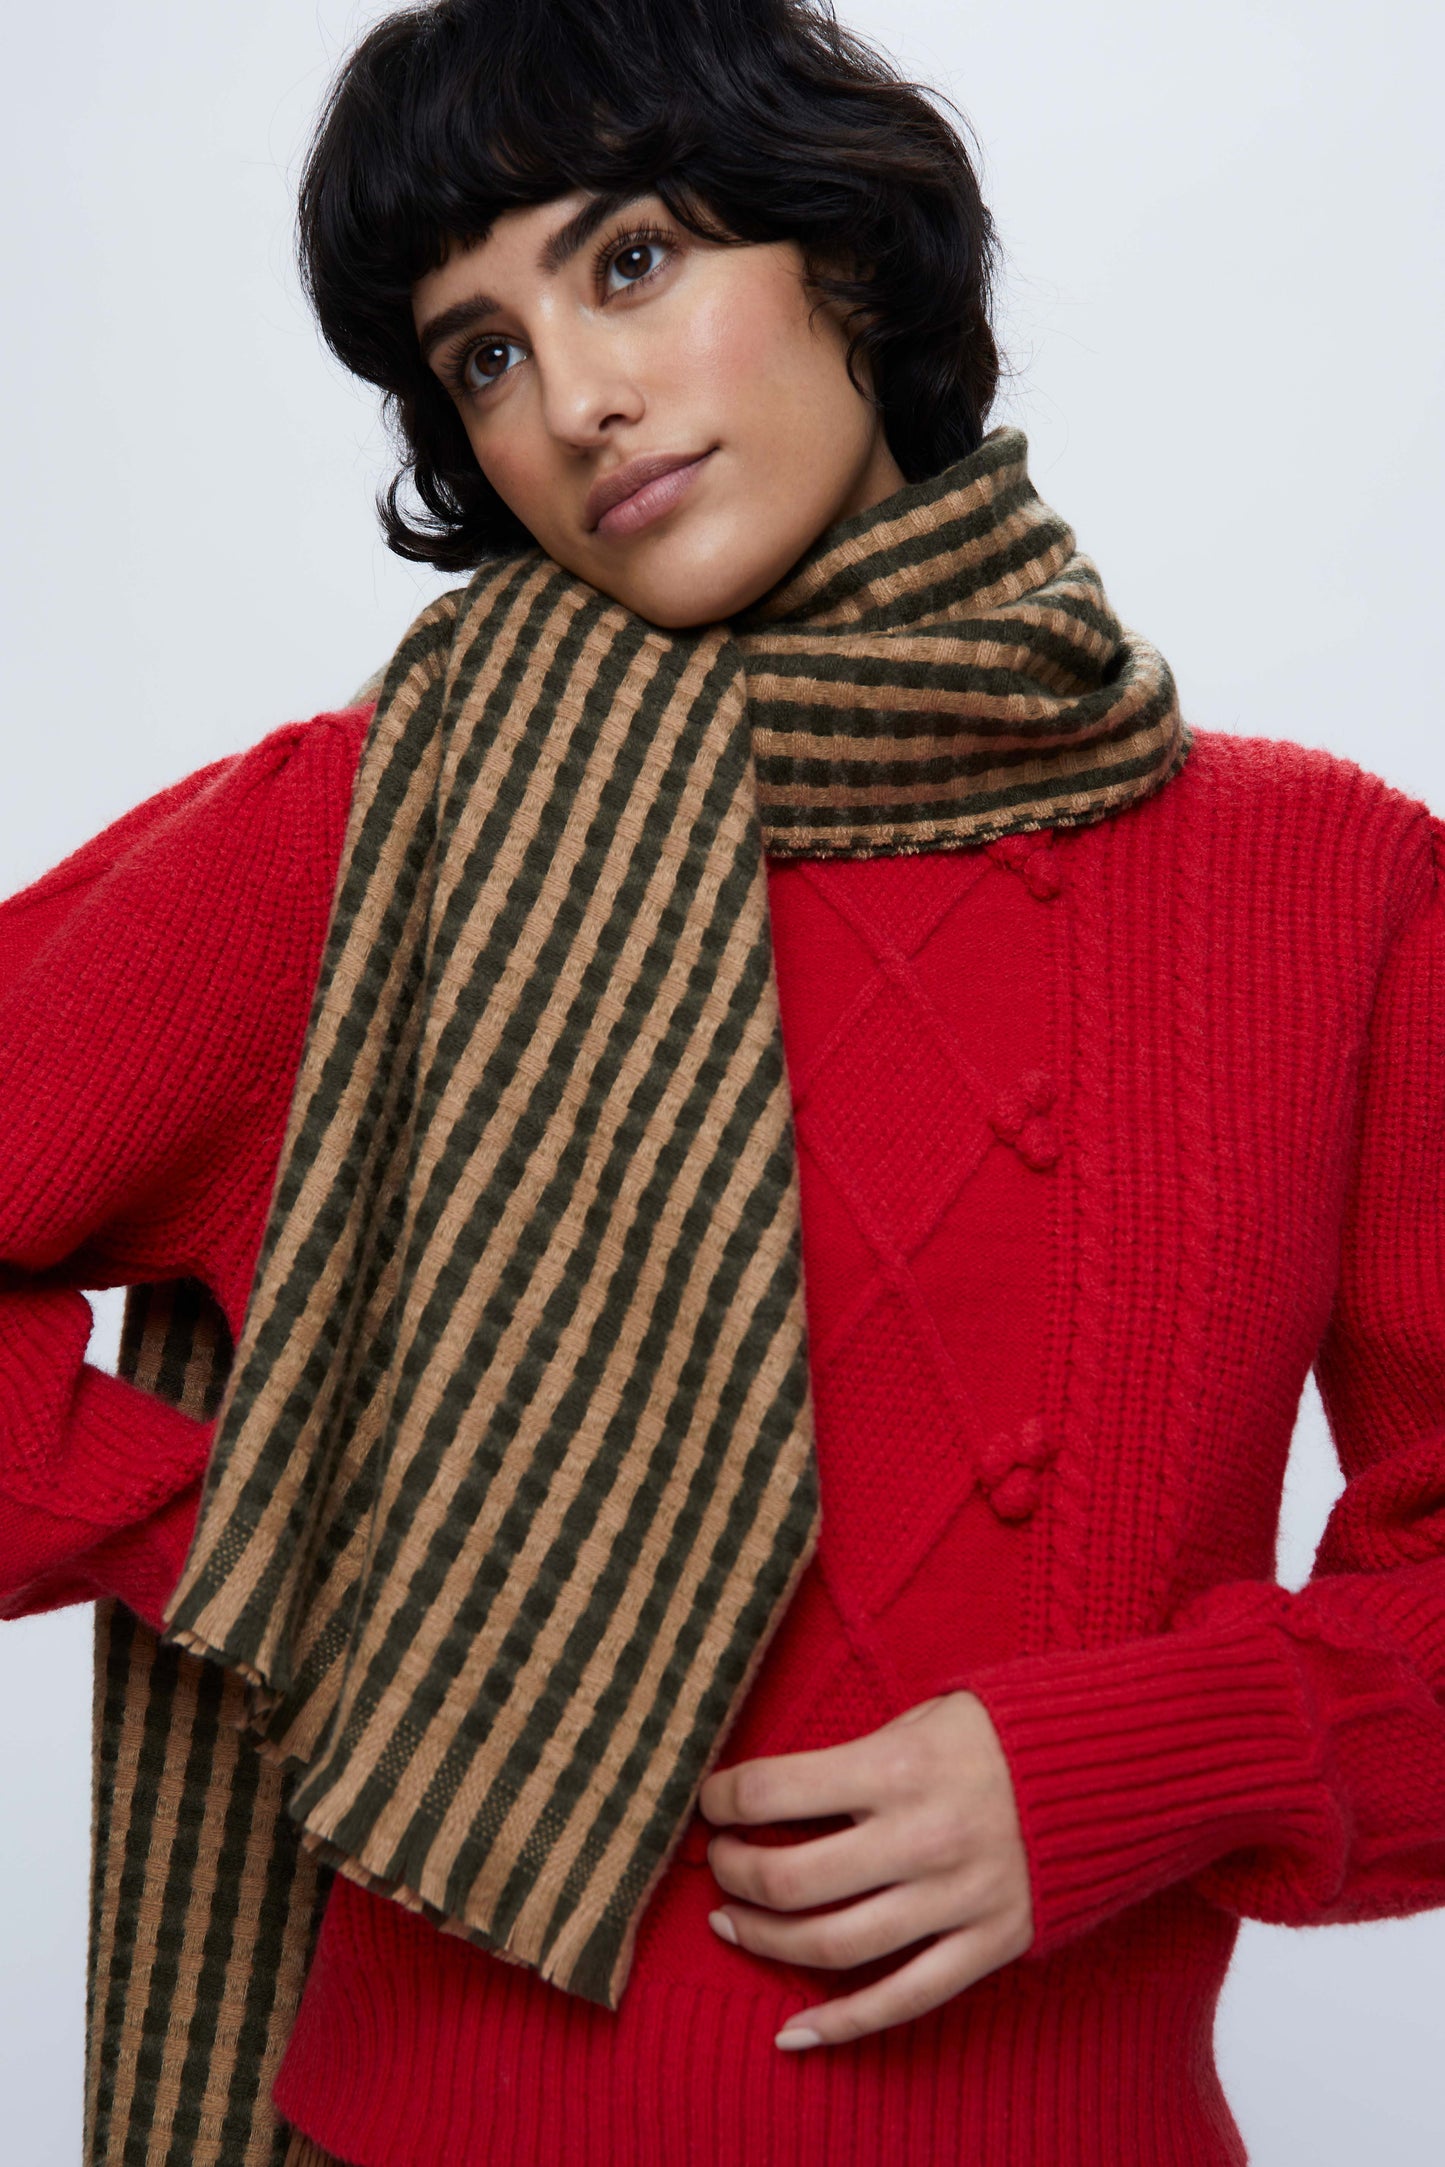 Knitted scarf with yellow gingham print